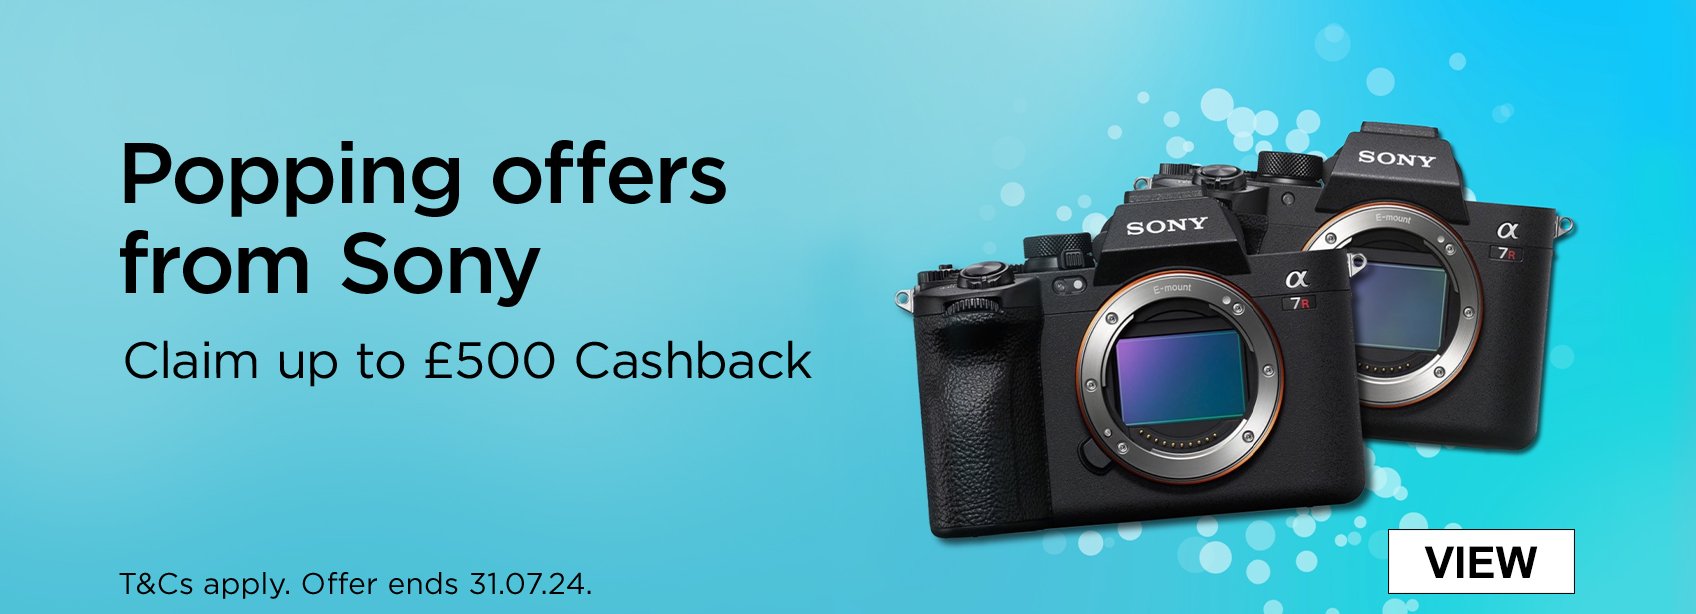 Popping offers from Sony Claim up to £500 Cashback T&Cs apply. Offer ends 31.07.24